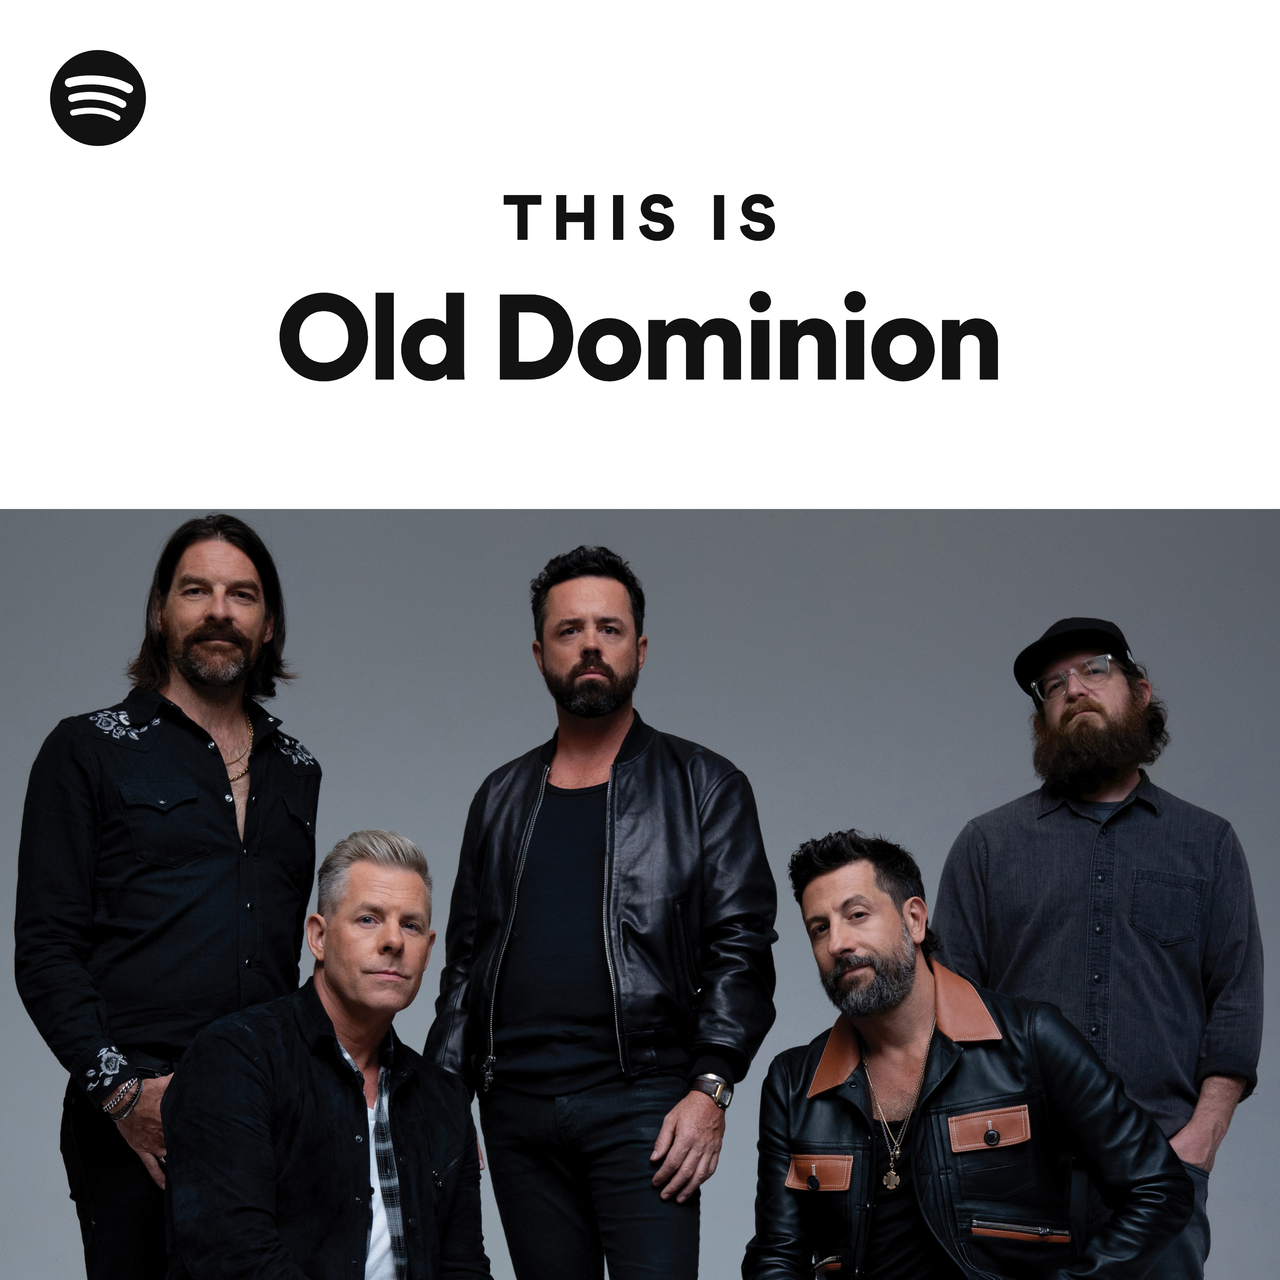 This Is Old Dominion